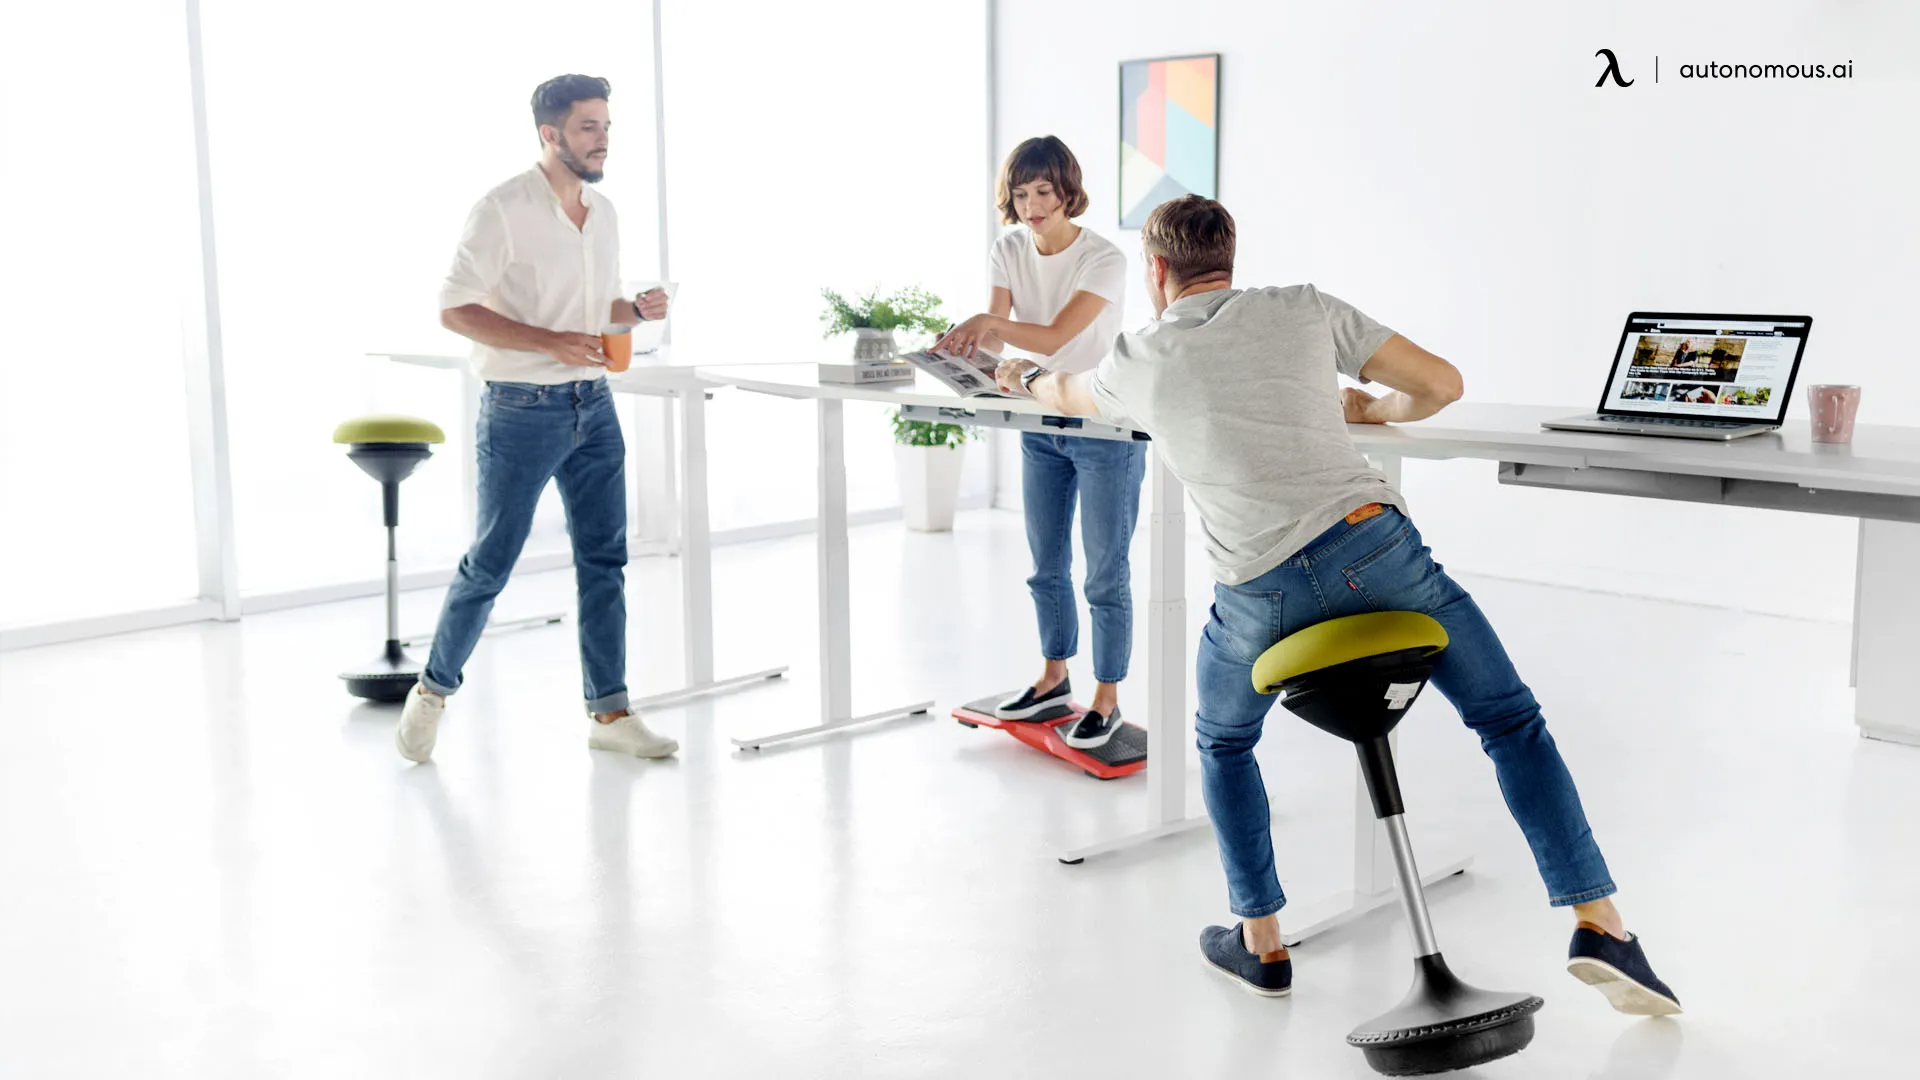 How Employees Can Fall Prey to Awkward Postures